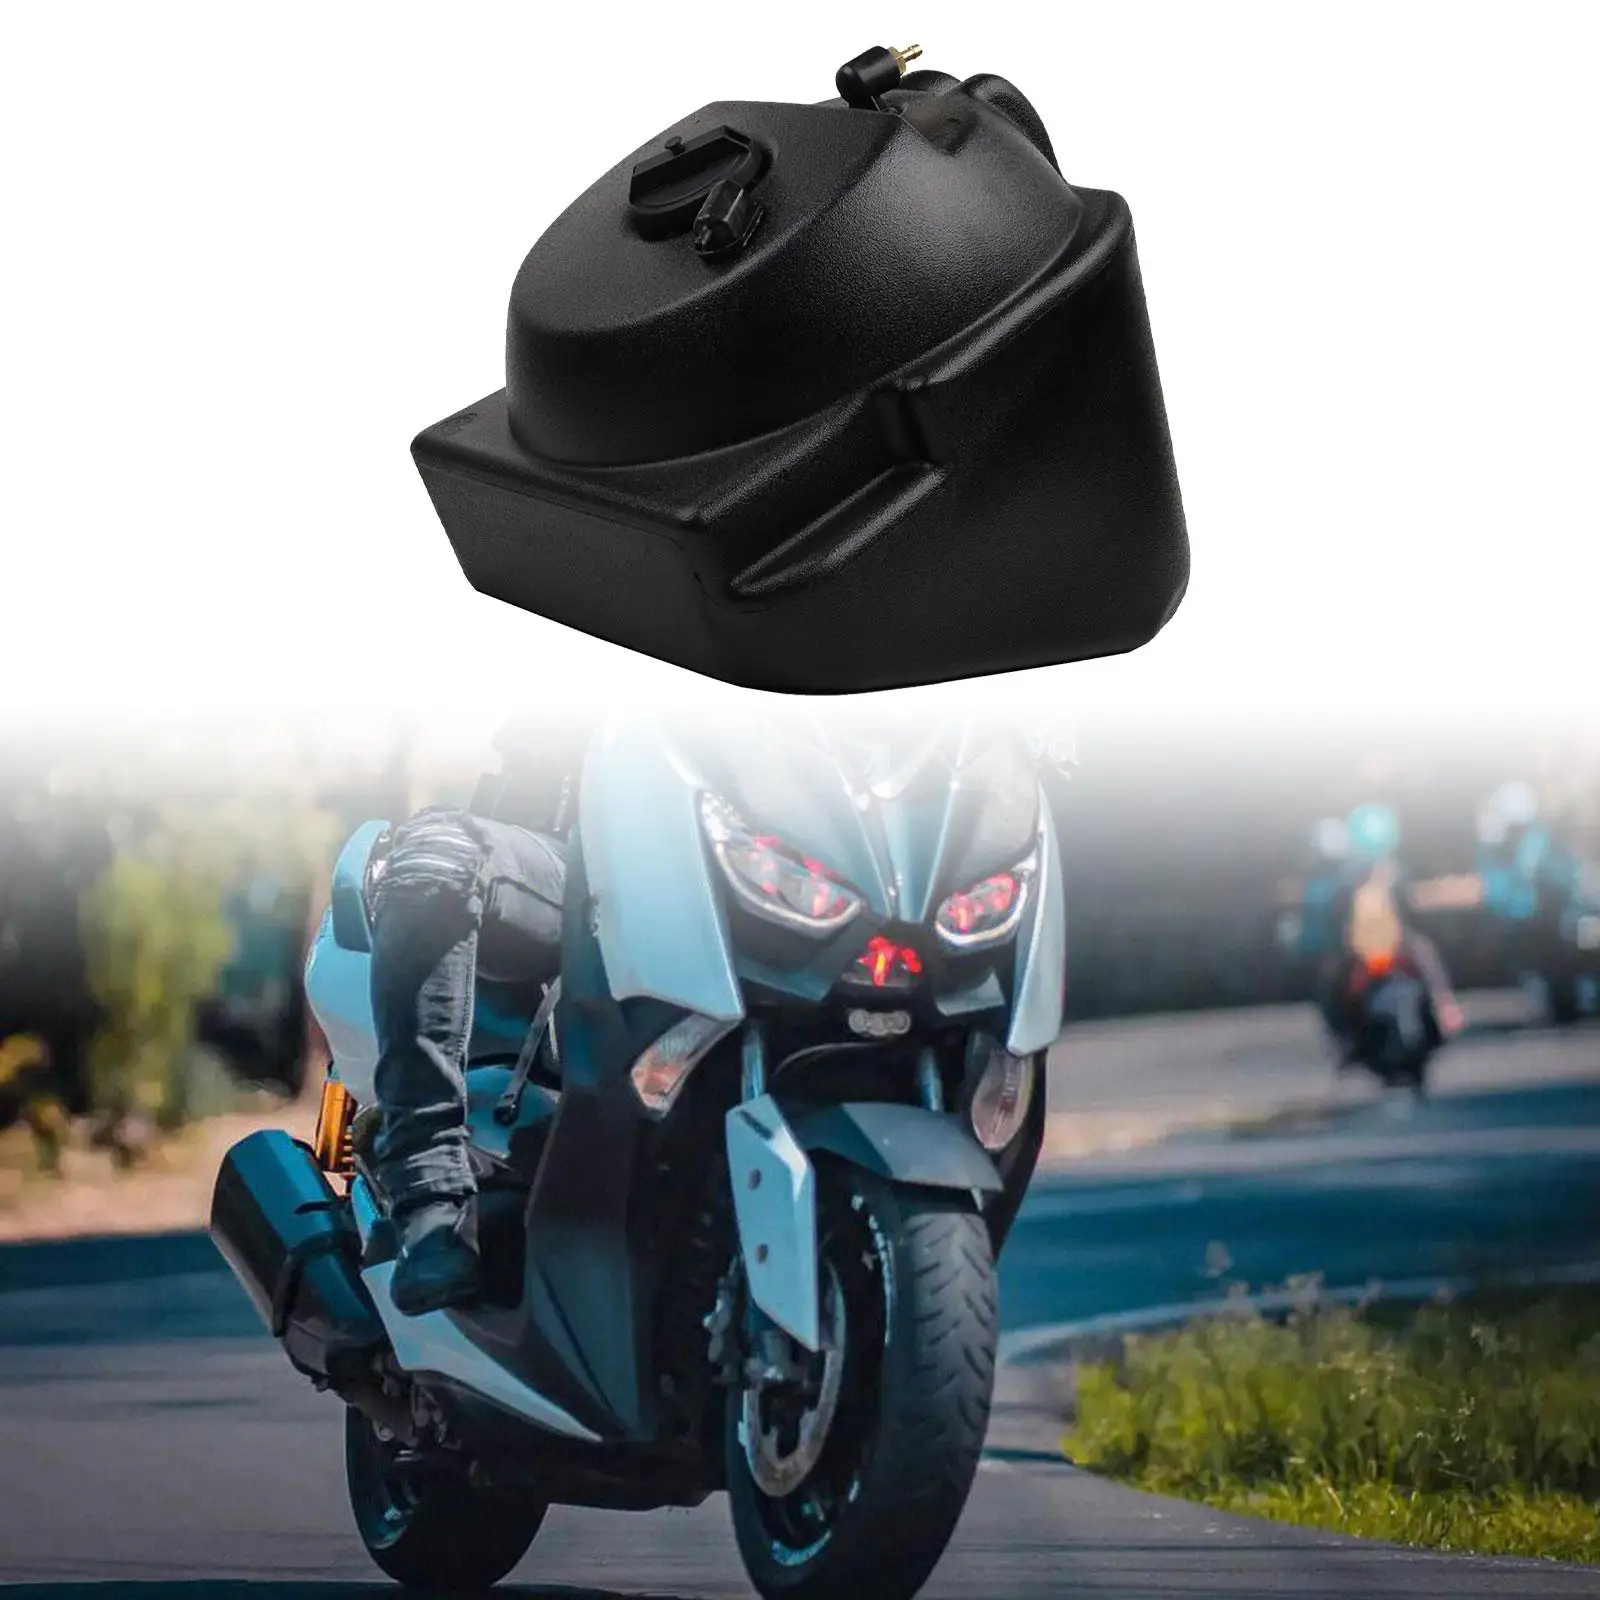 Auxiliary Fuel Tank Easy Installation Motorcycle Accessories Mounting Hardware Oil Tank Fuel Tank Oil Box for Yamaha